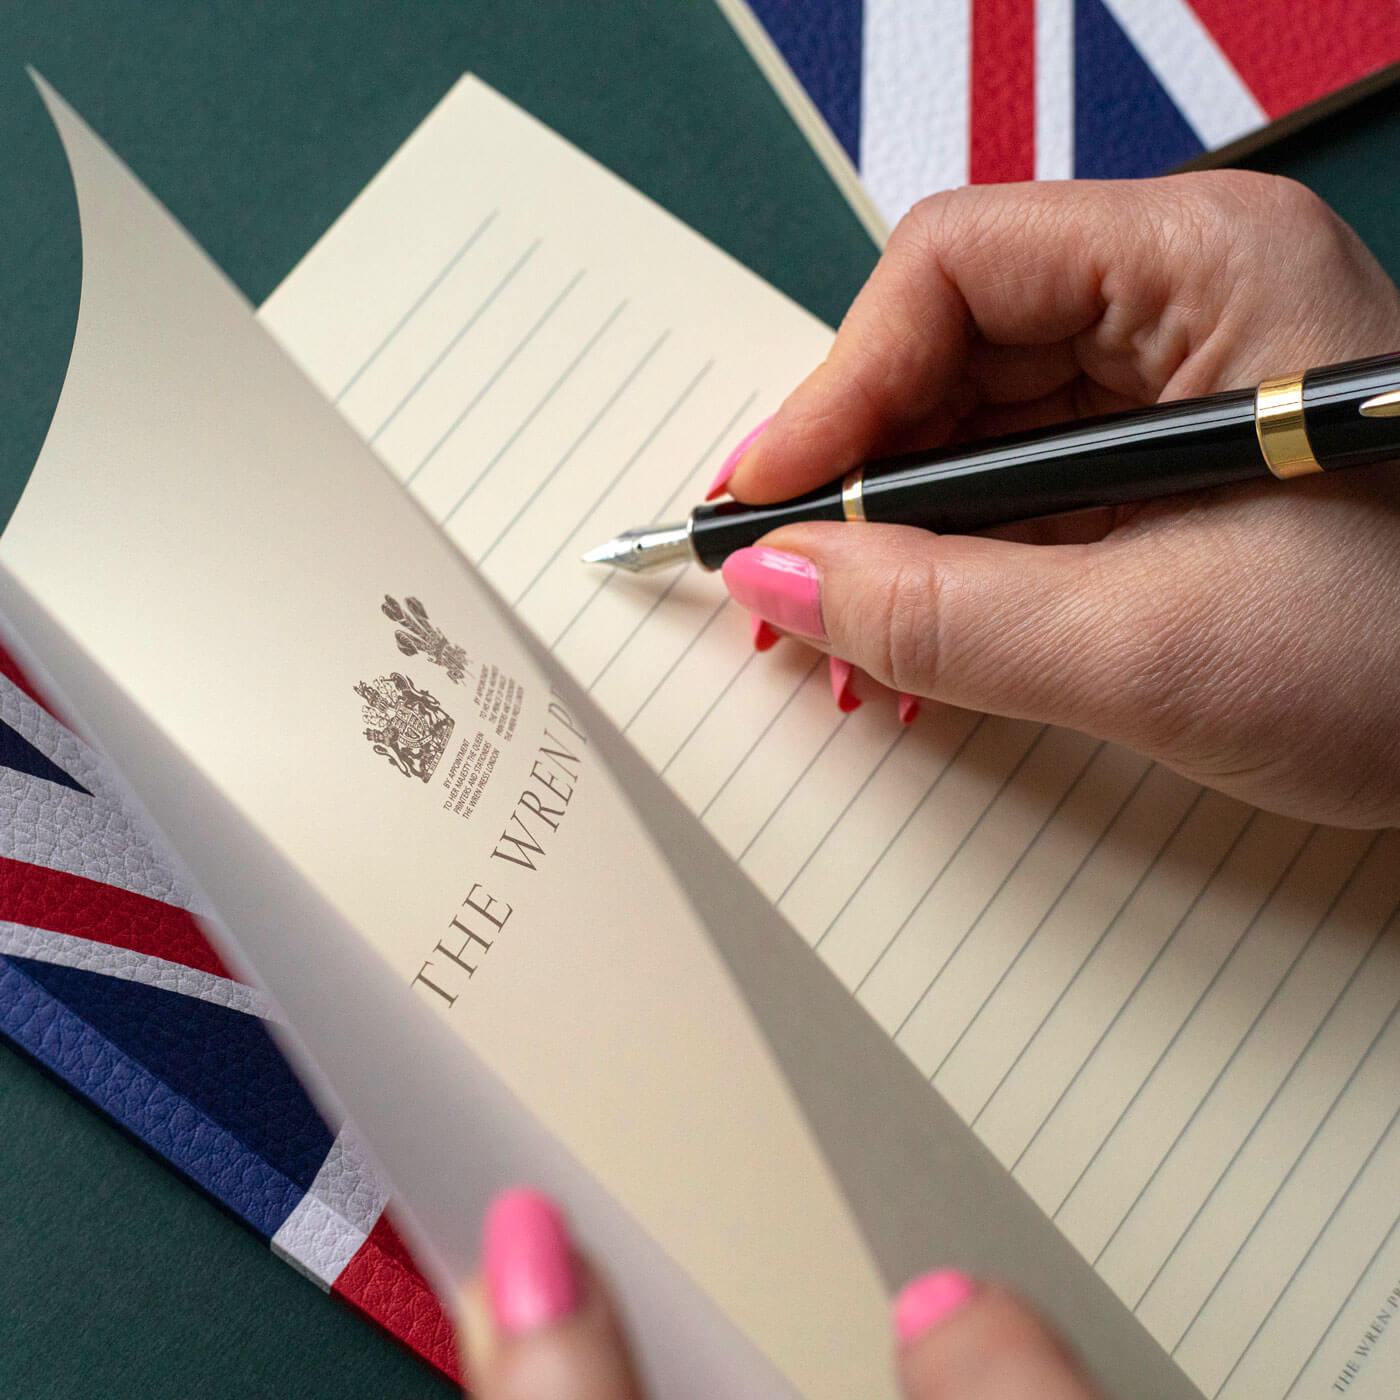 lady writing with pen on pages of textured union jack printed notebook